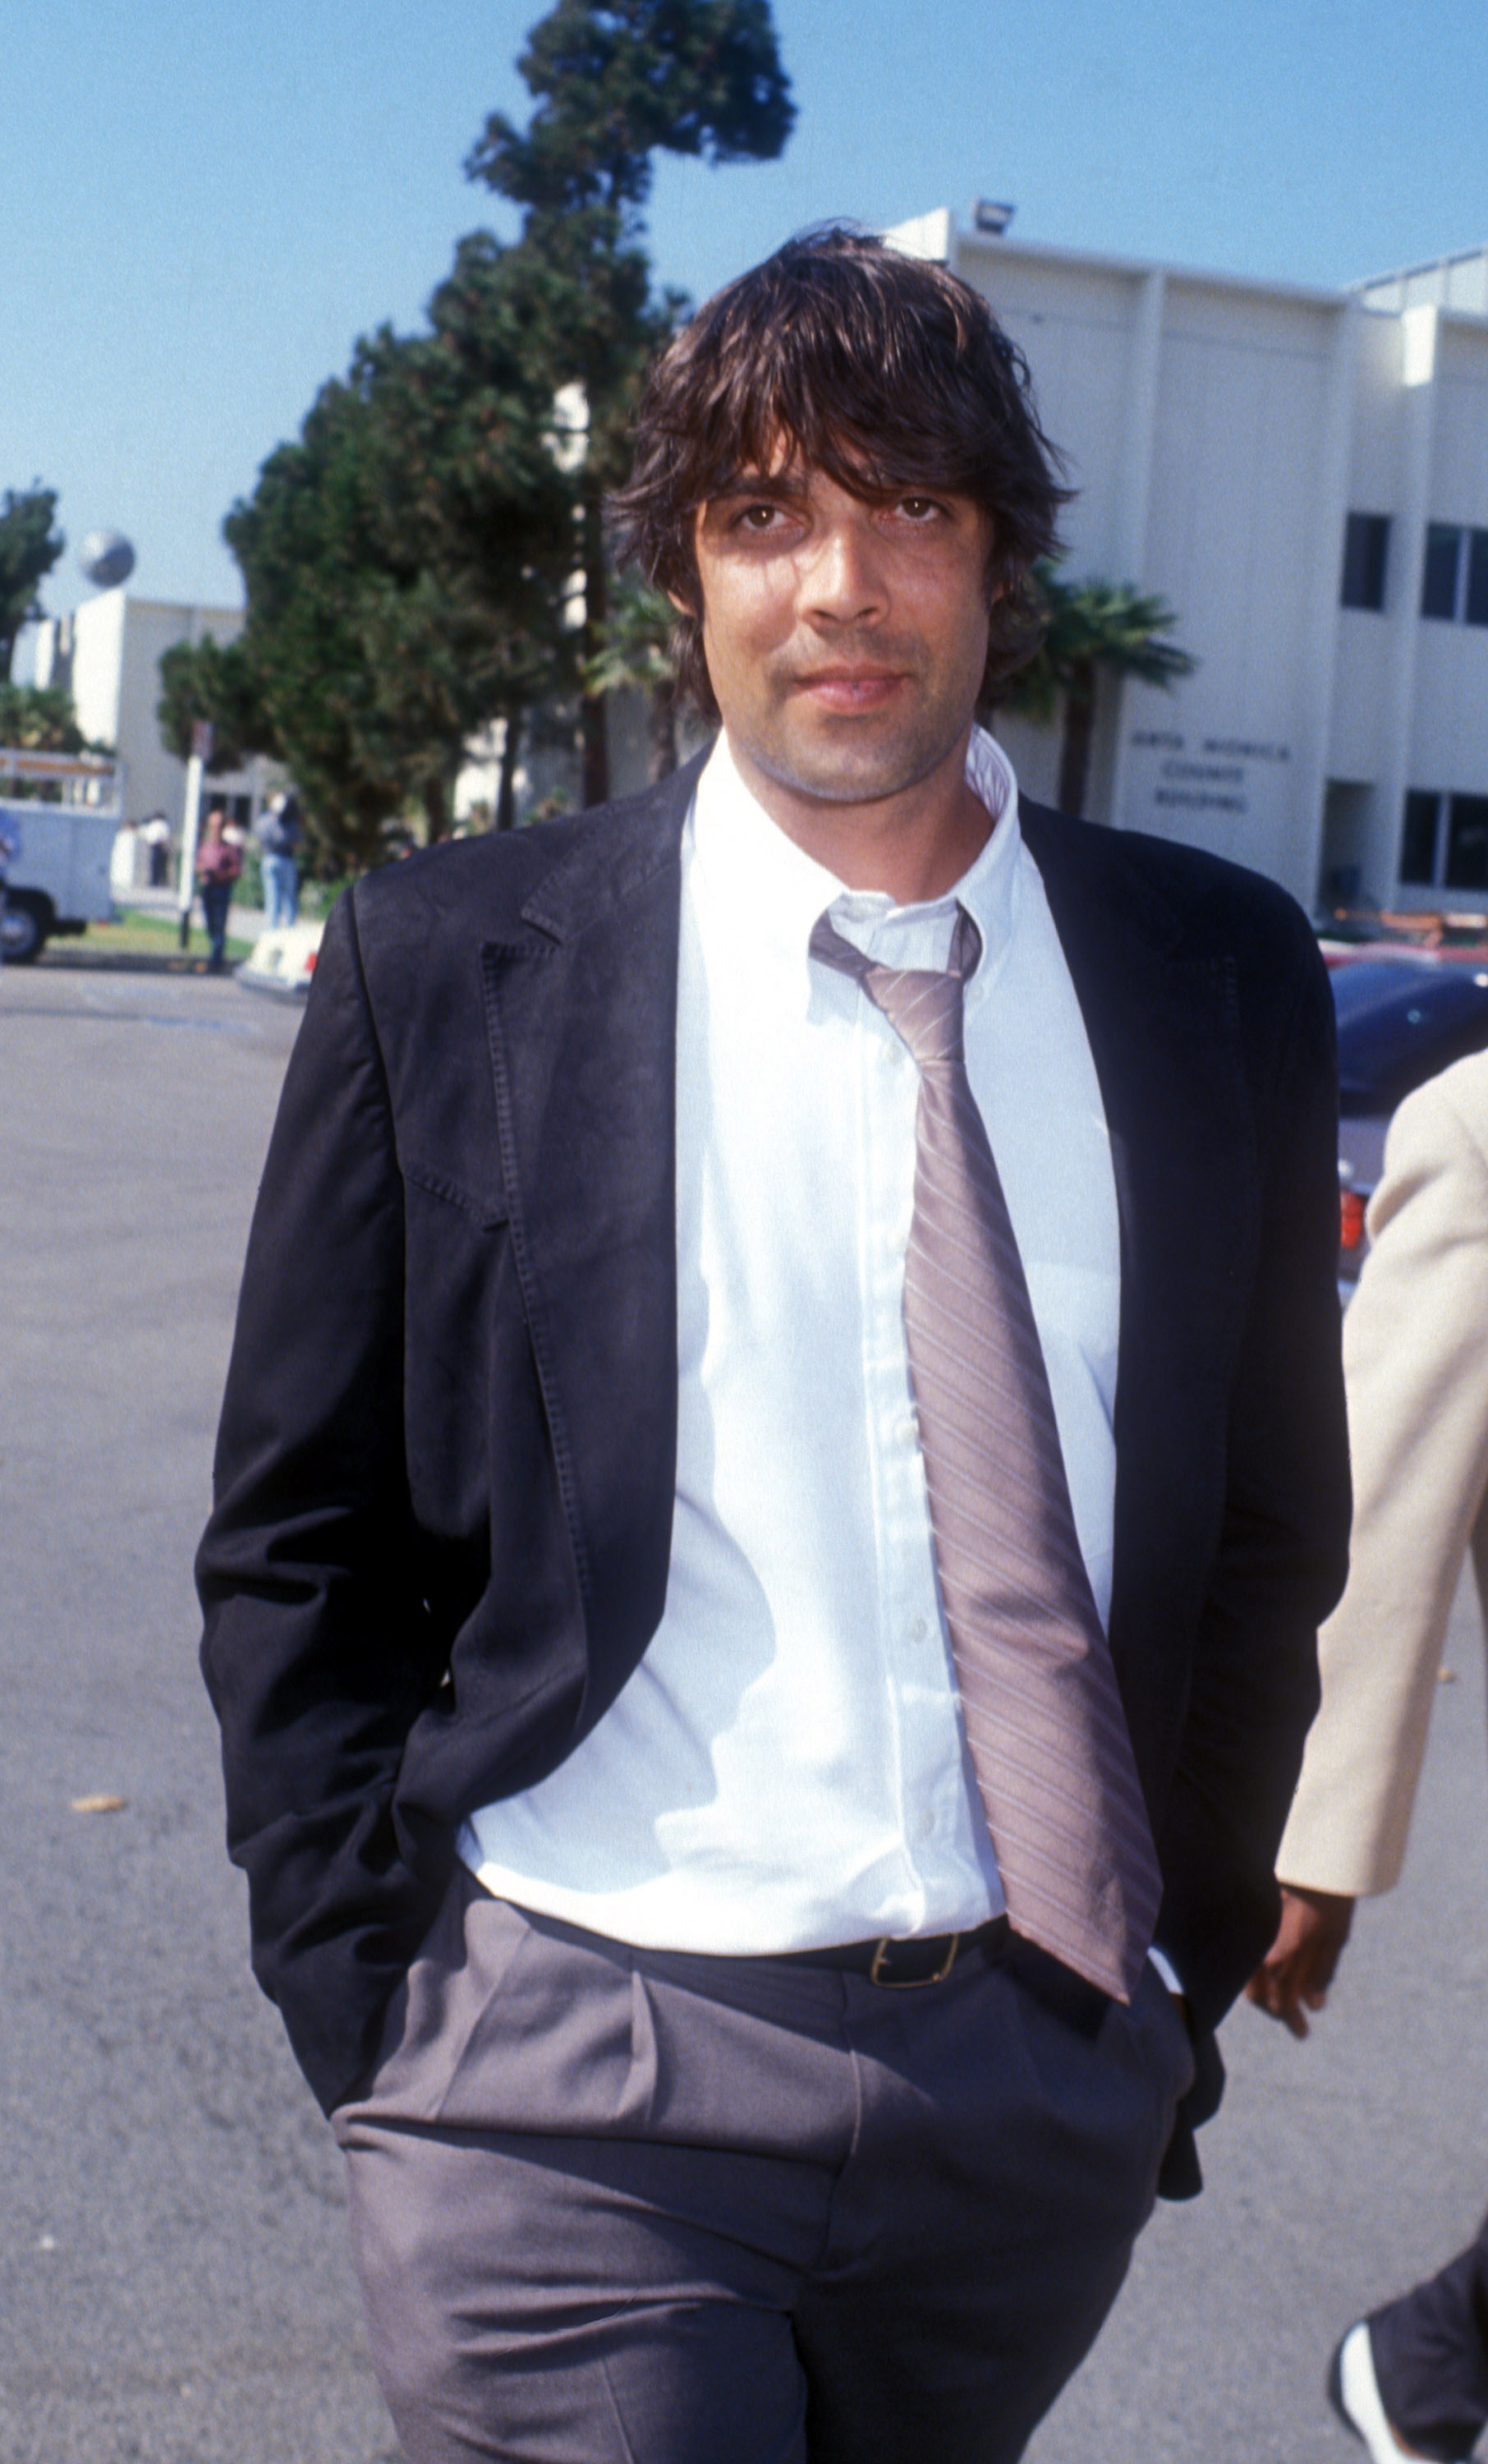 Christian Brando during a press conference at the Santa Monica Courthouse in Santa Monica, California | Source: Getty Images